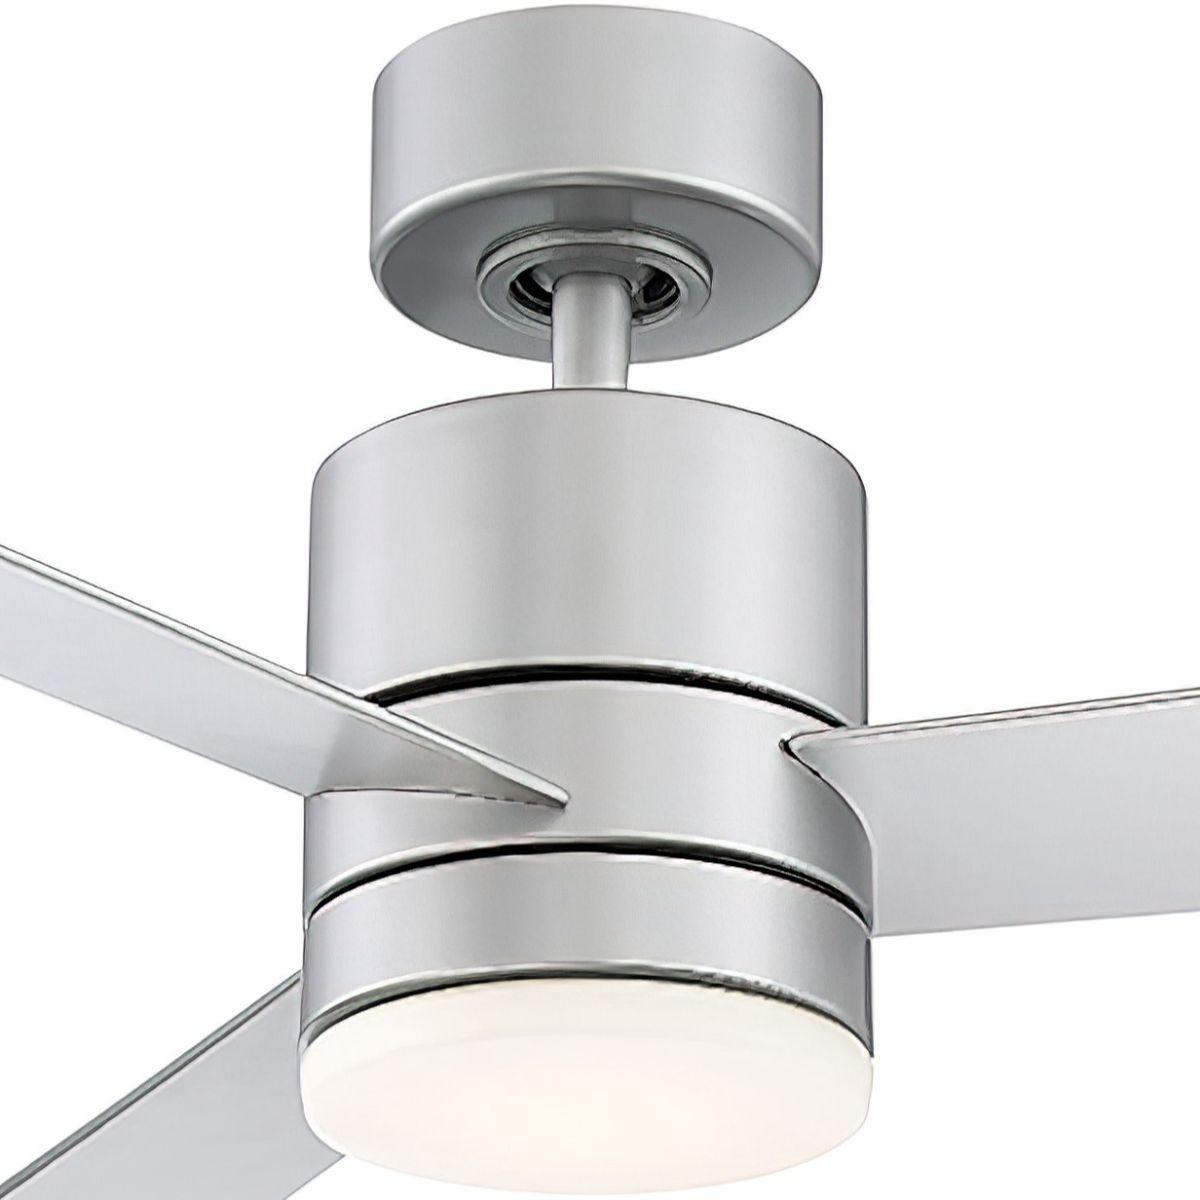 Axis 52 Inch Propeller Outdoor Smart Ceiling Fan With 3500K LED And Remote - Bees Lighting